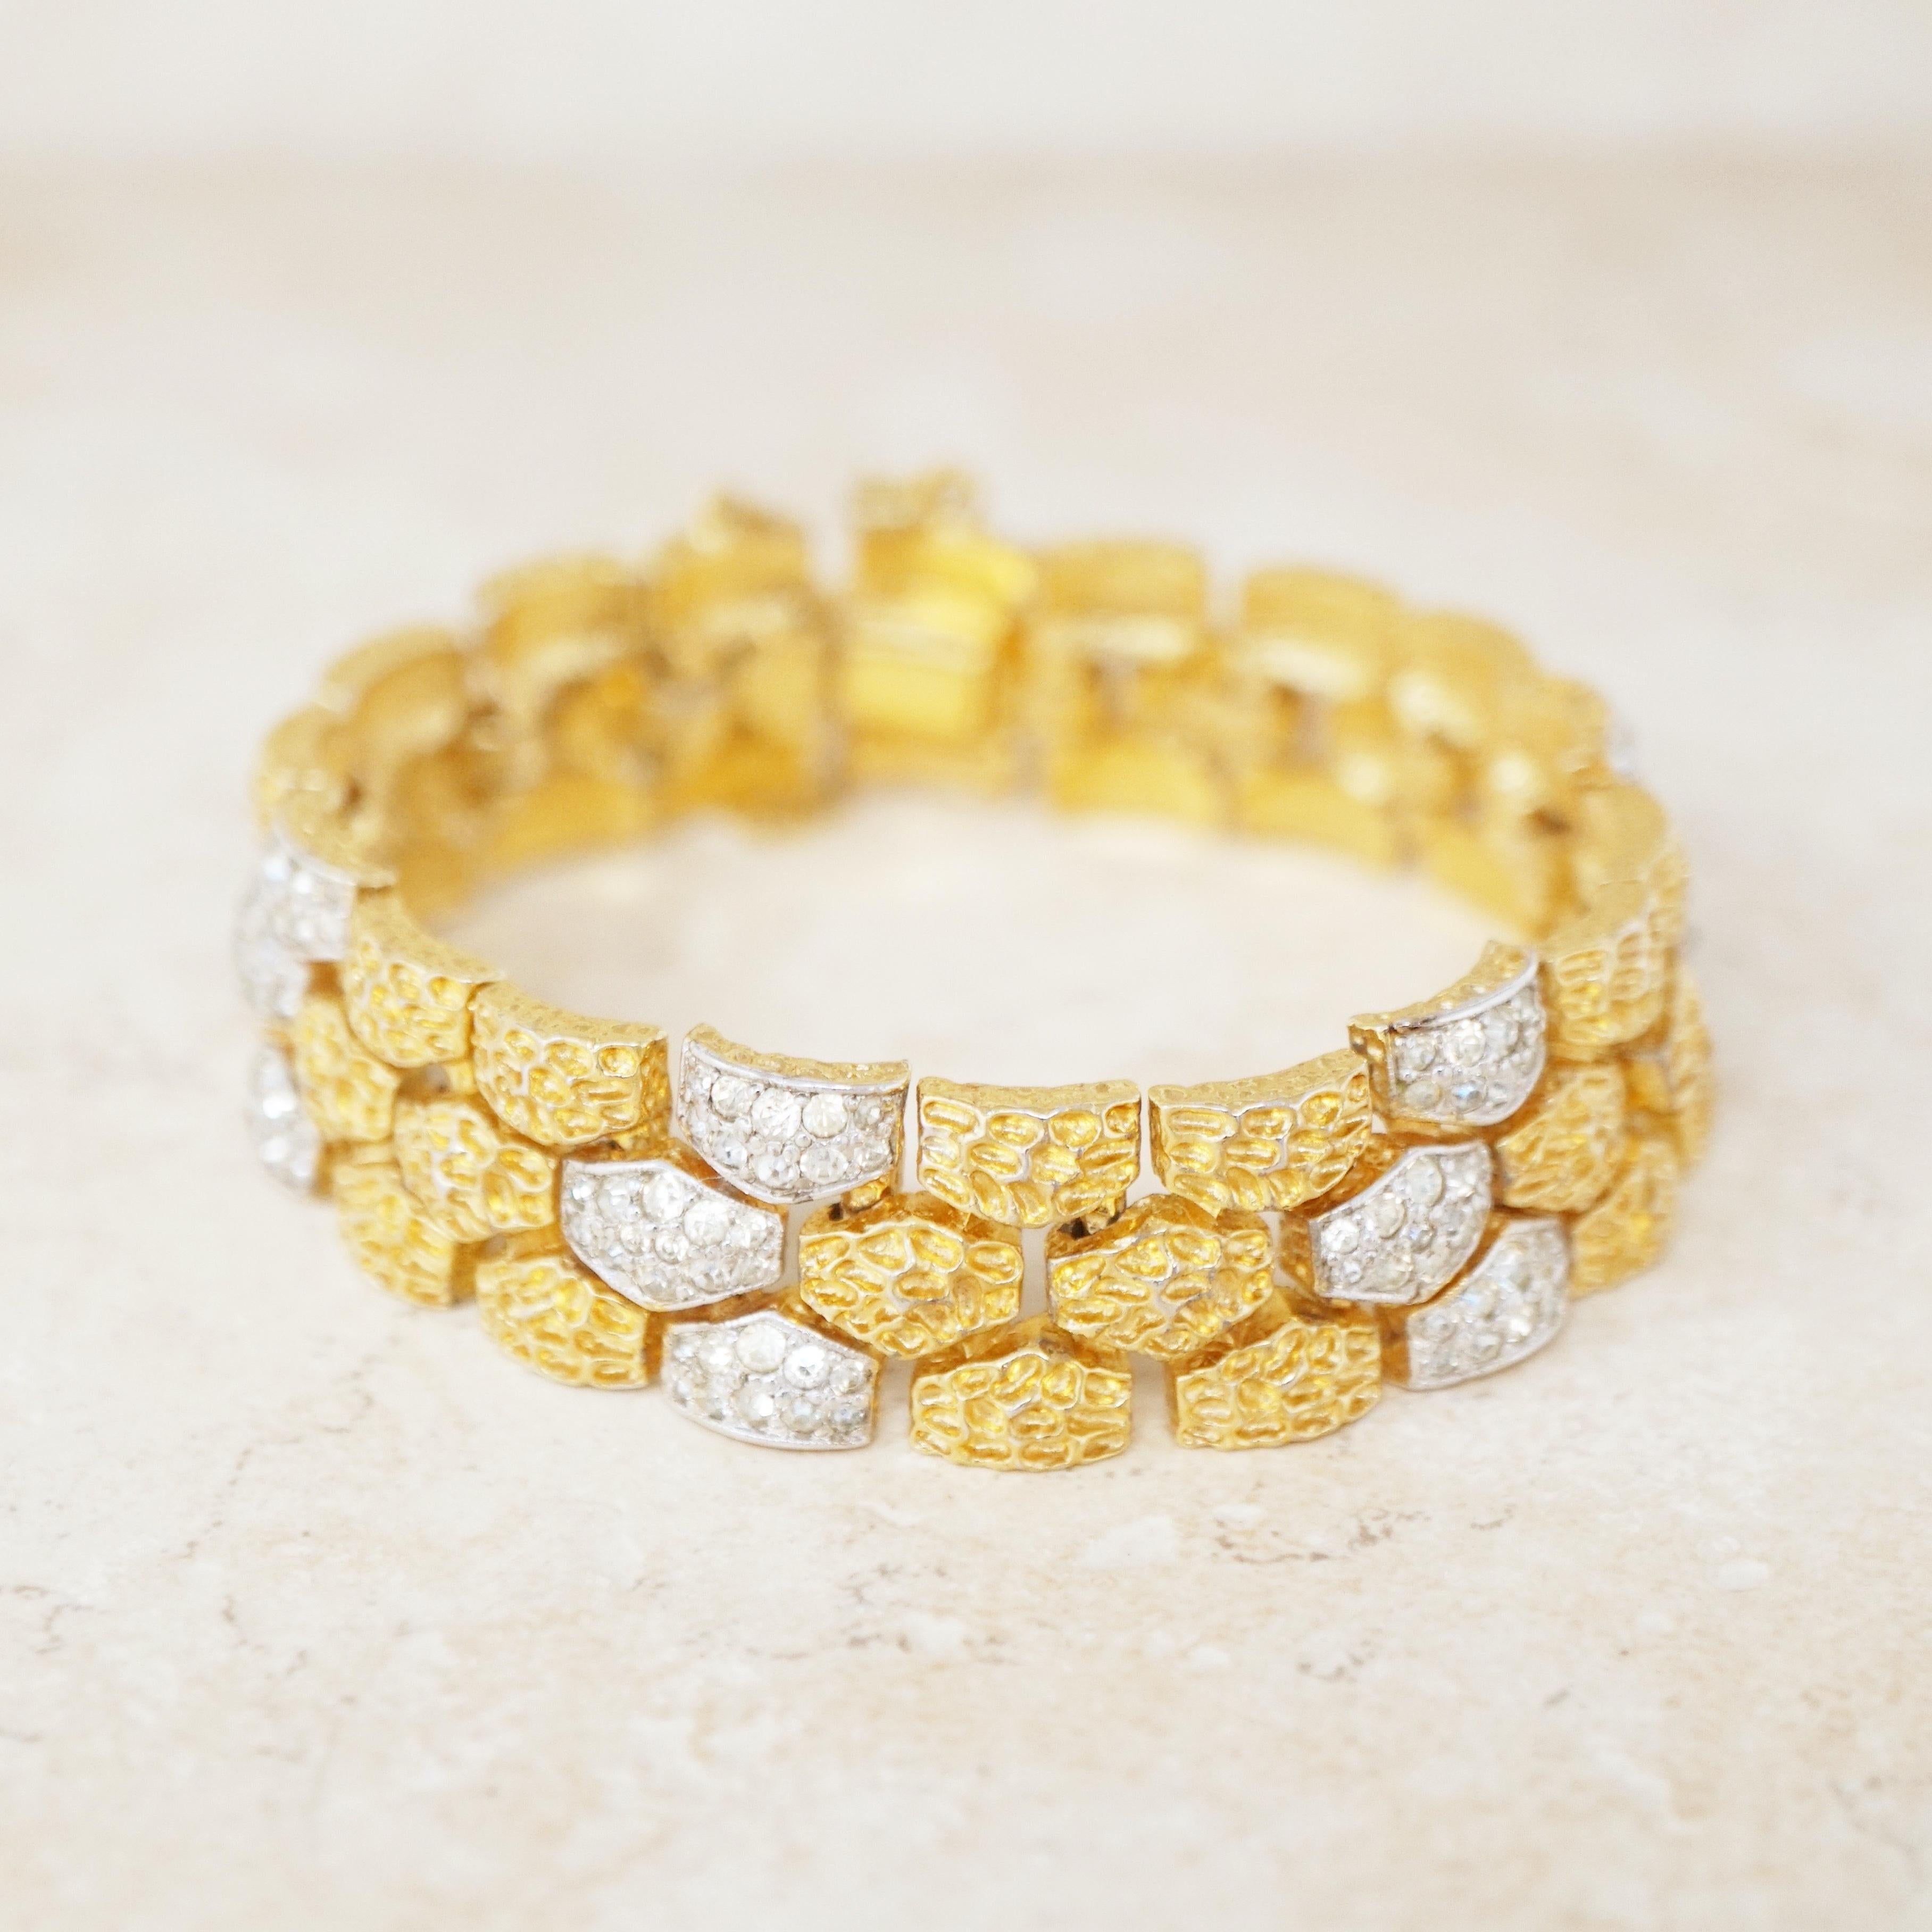 Vintage Two Tone Gilt & Rhinestone Textured Nugget Bracelet by Panetta, 1970s In Excellent Condition For Sale In McKinney, TX